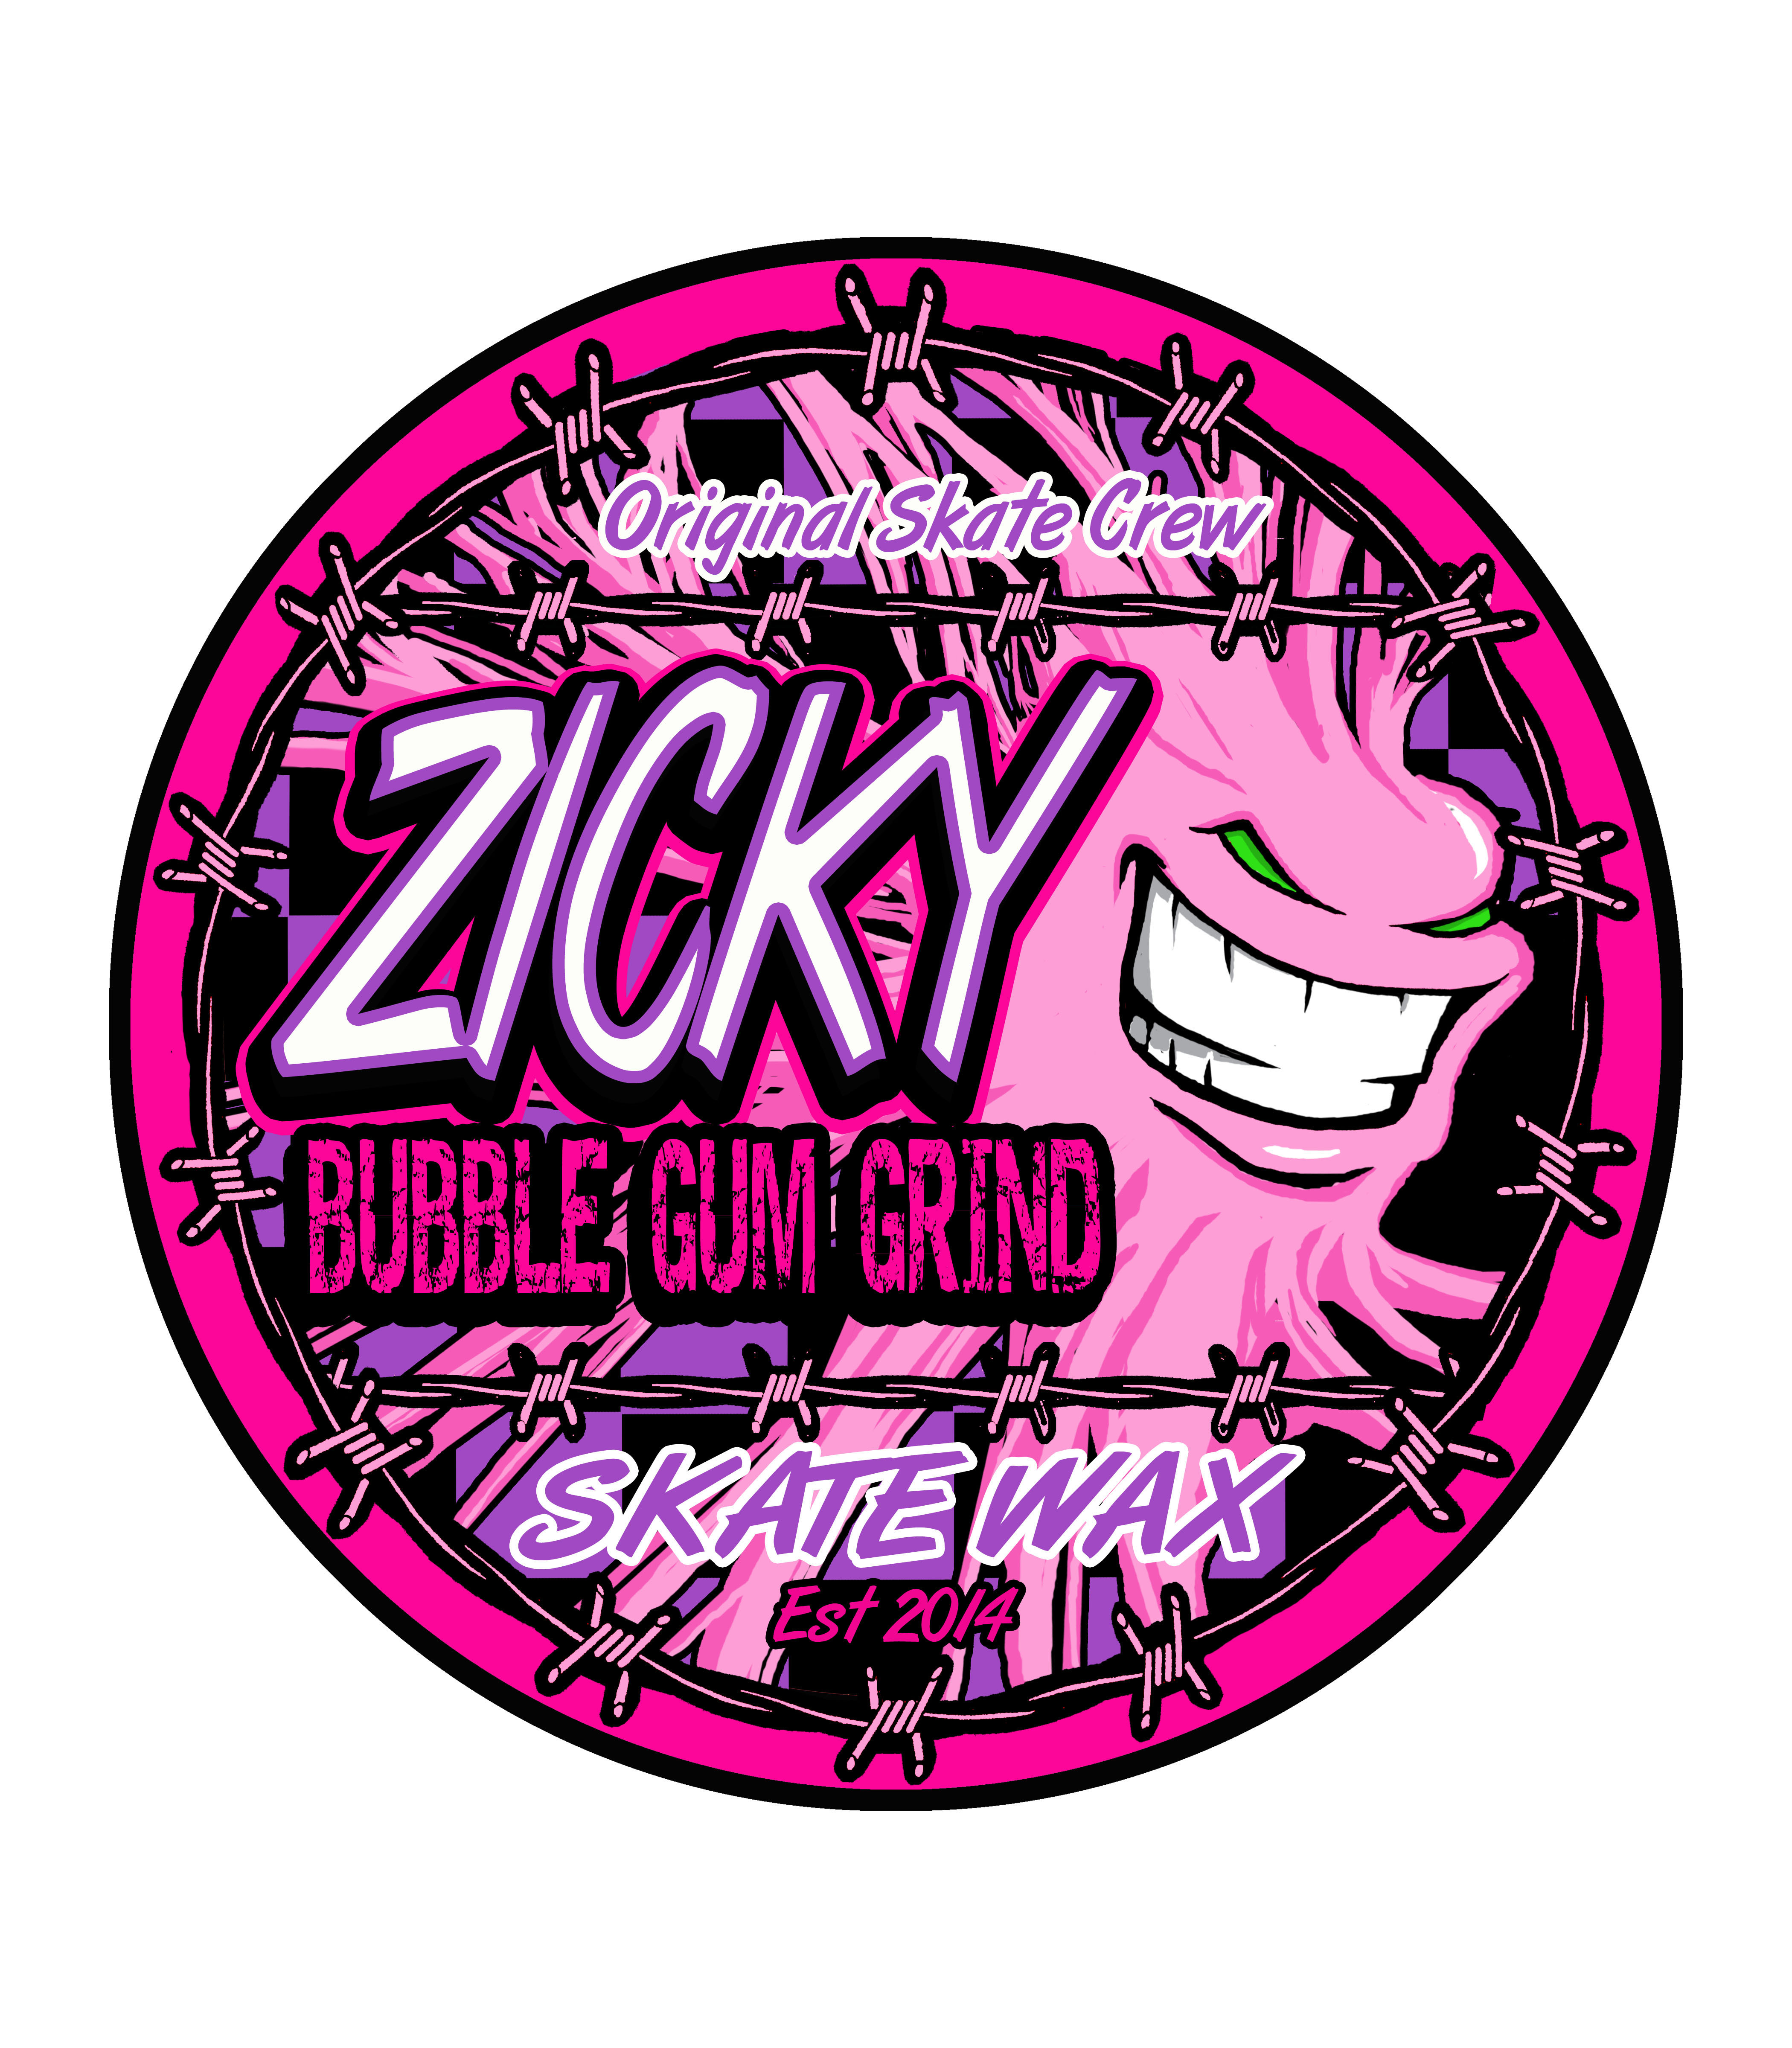 Zicky Bubble Gum f1